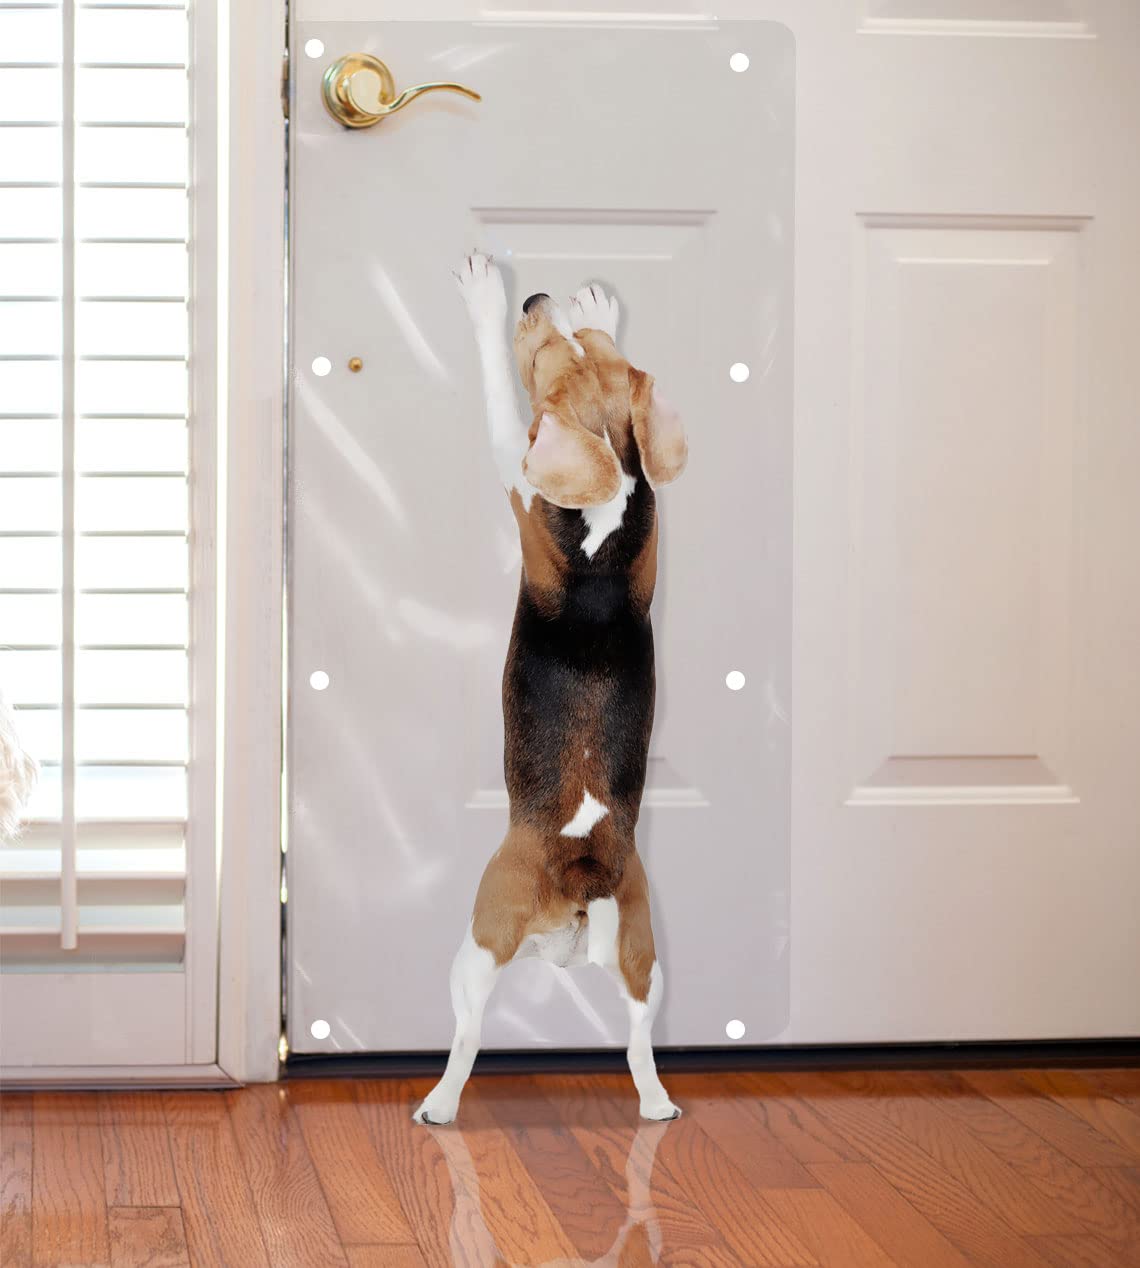 LAMINET The Original Deluxe Dog Scratch Shield - Protect Your Doors & Walls with Our Deluxe Heavy-Duty Flexible Plastic Dog Scratch Shield - (36L x 16W - INCHES)